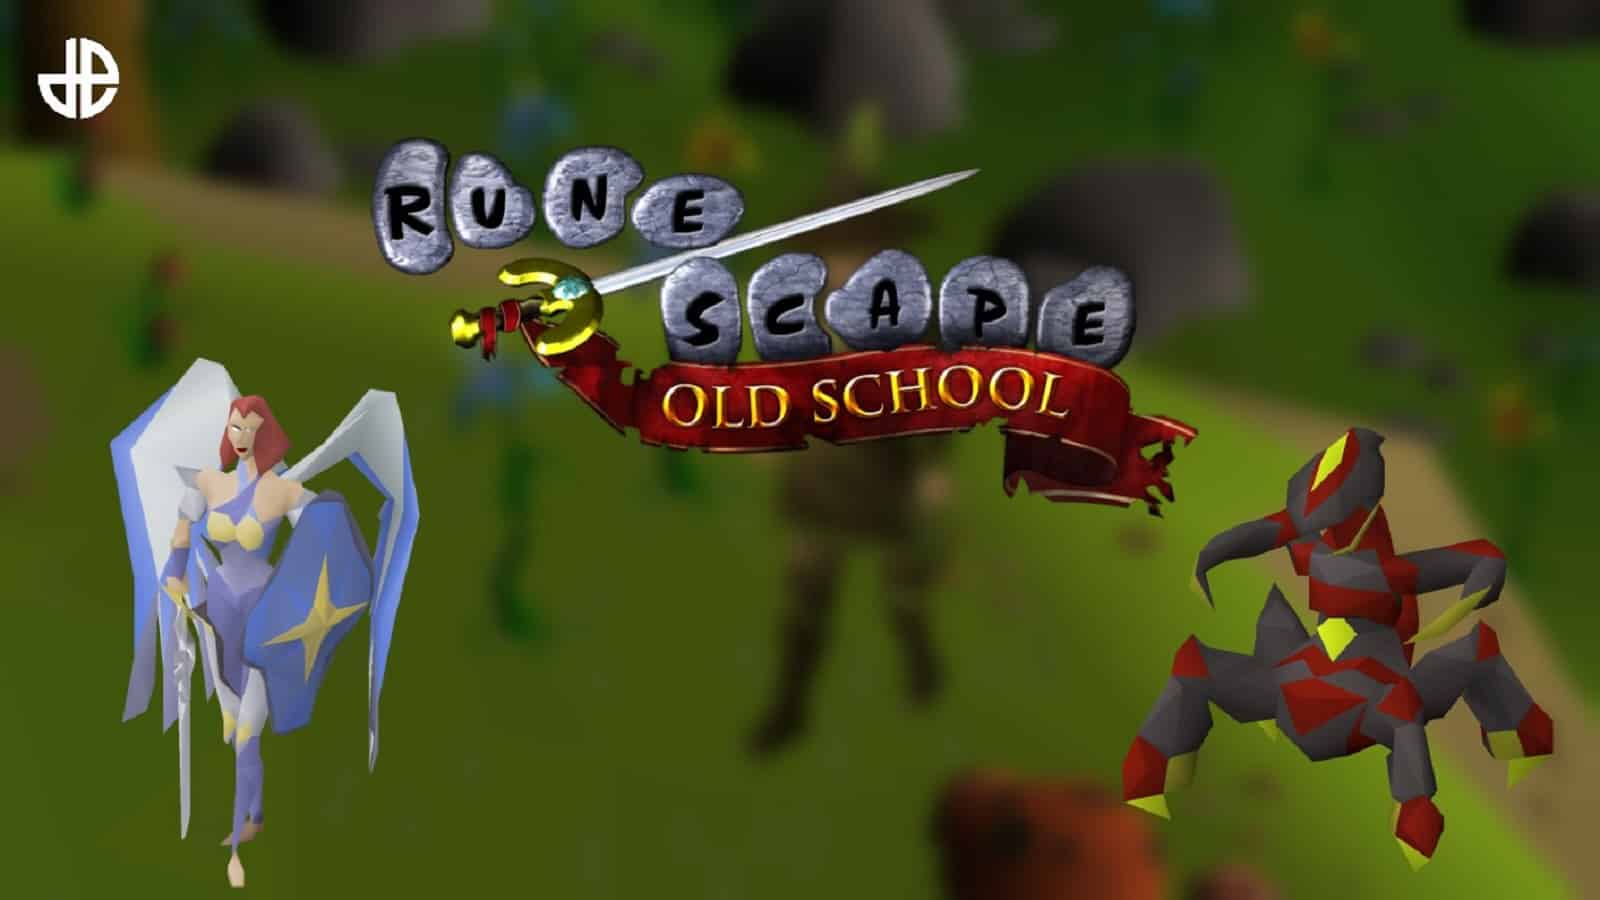 RuneScape: Everything You Need to Know to Start